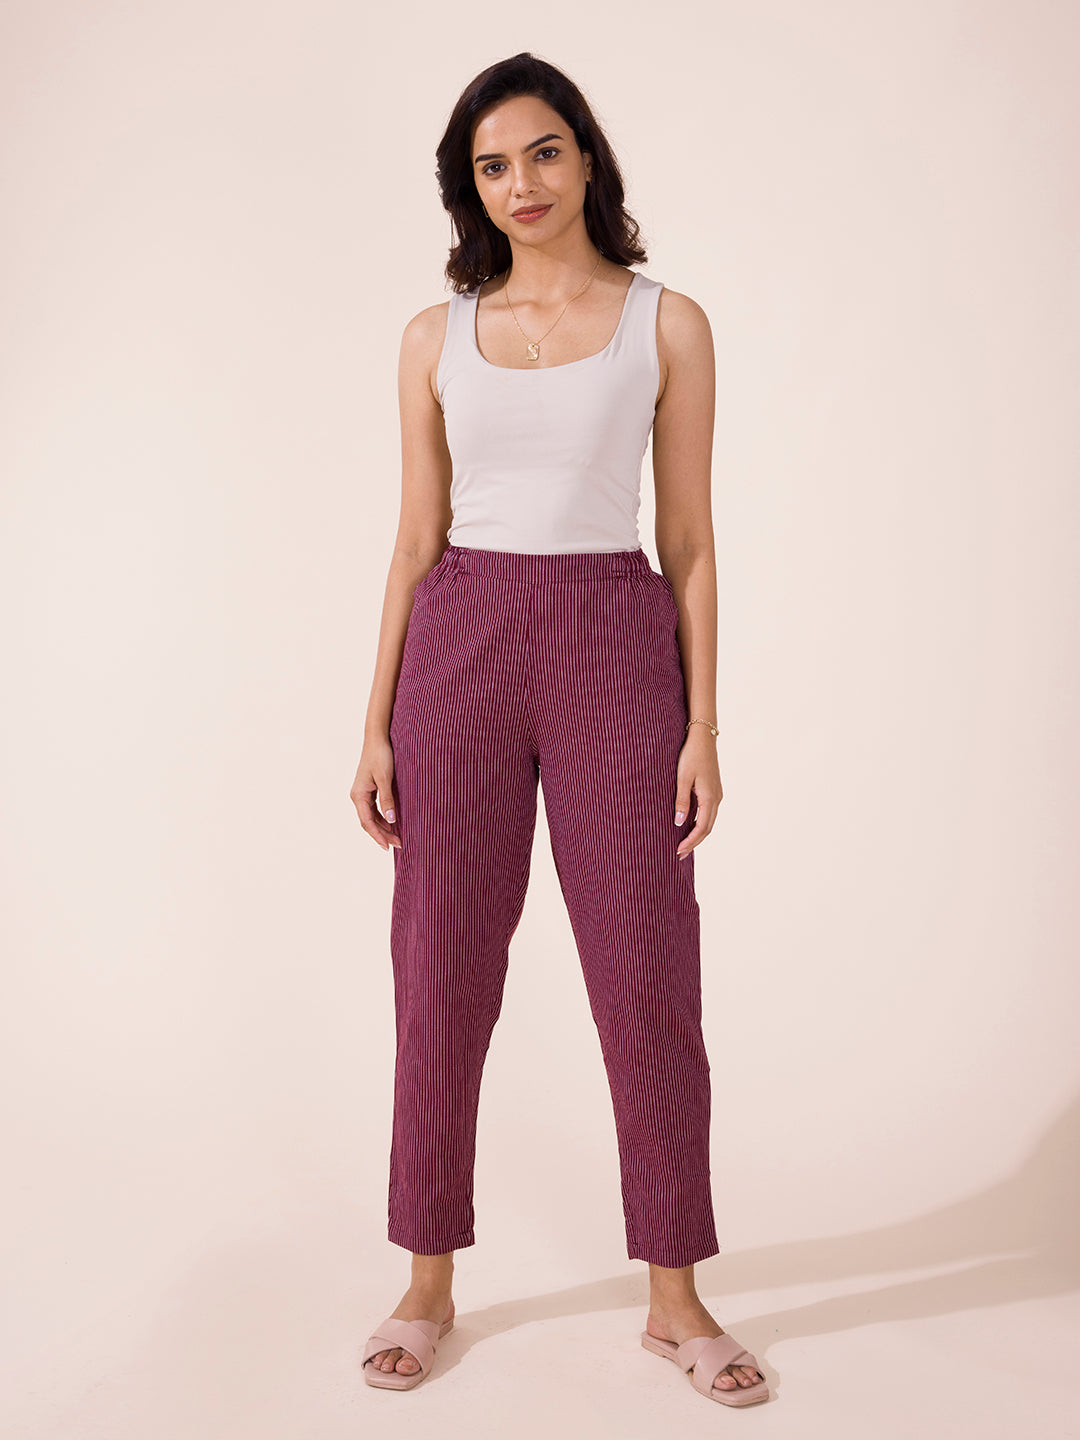 Trousers With Matching Belt Casual Formal Office Pants For Ladies - Claret  Red - Wholesale Womens Clothing Vendors For Boutiques